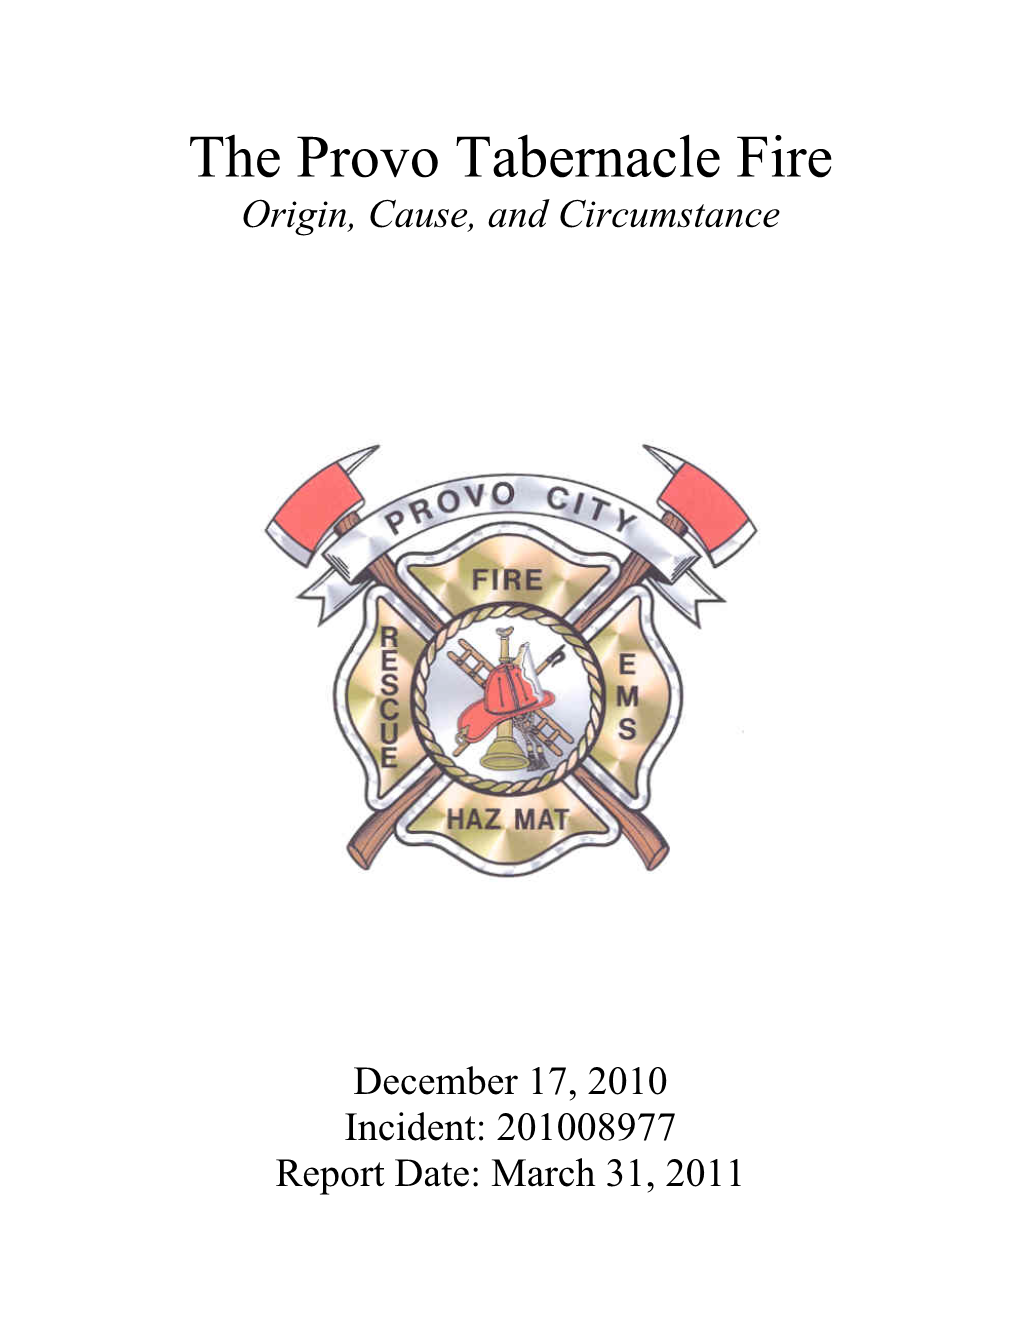 The Provo Tabernacle Fire Origin, Cause, and Circumstance